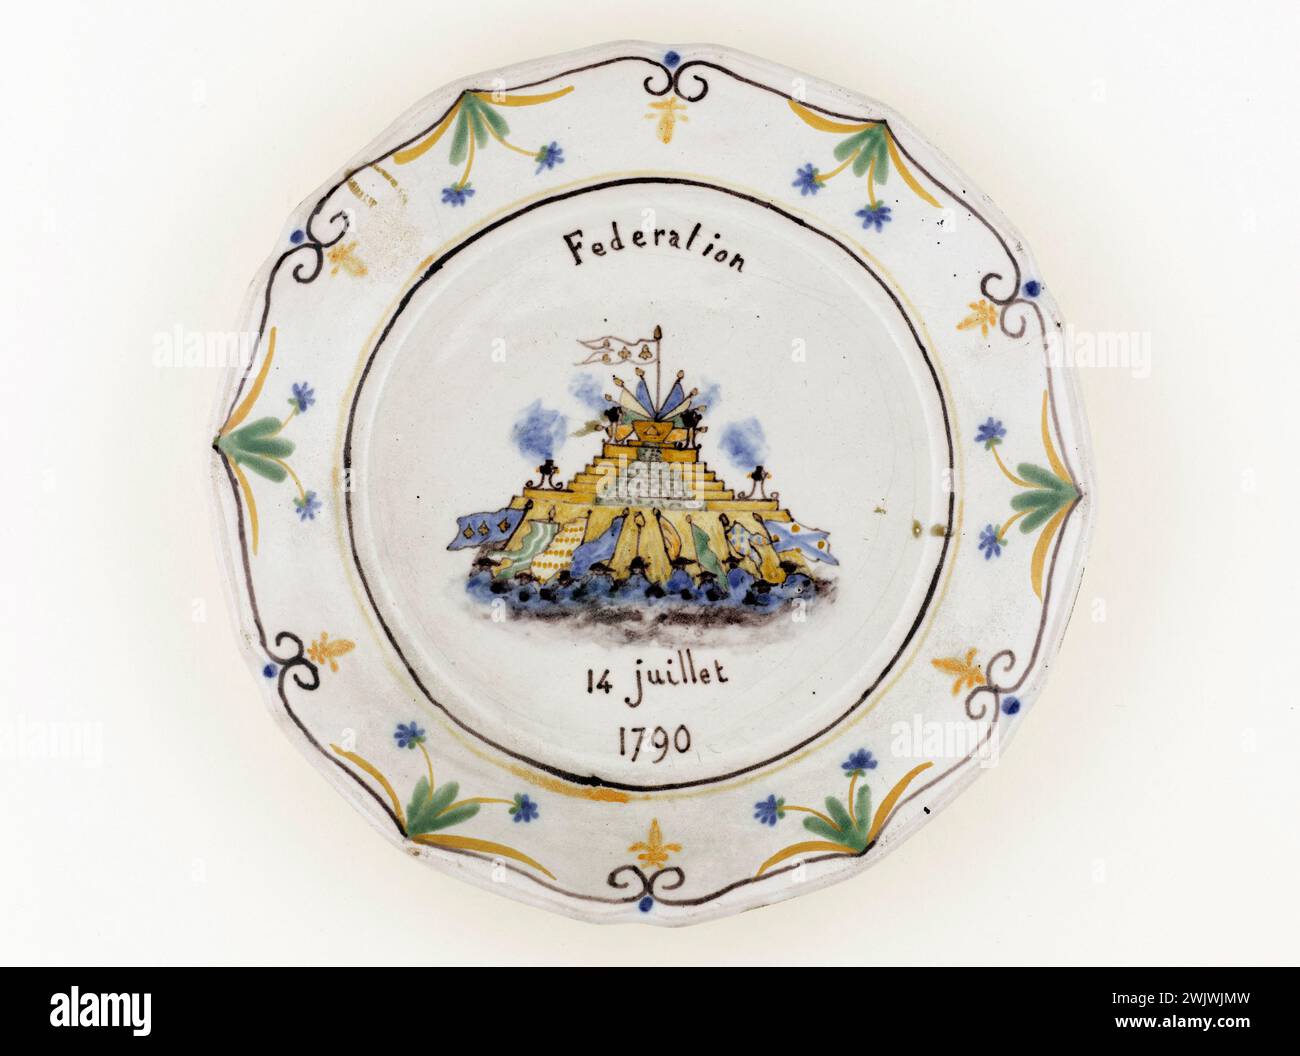 Anonymous. Plate at the federation party. Earthenware. Paris, Carnavalet museum. 71684-38 Decoration, Faience, Federation, Fete, Revolutionary Periode, French Revolution, Plate Stock Photo